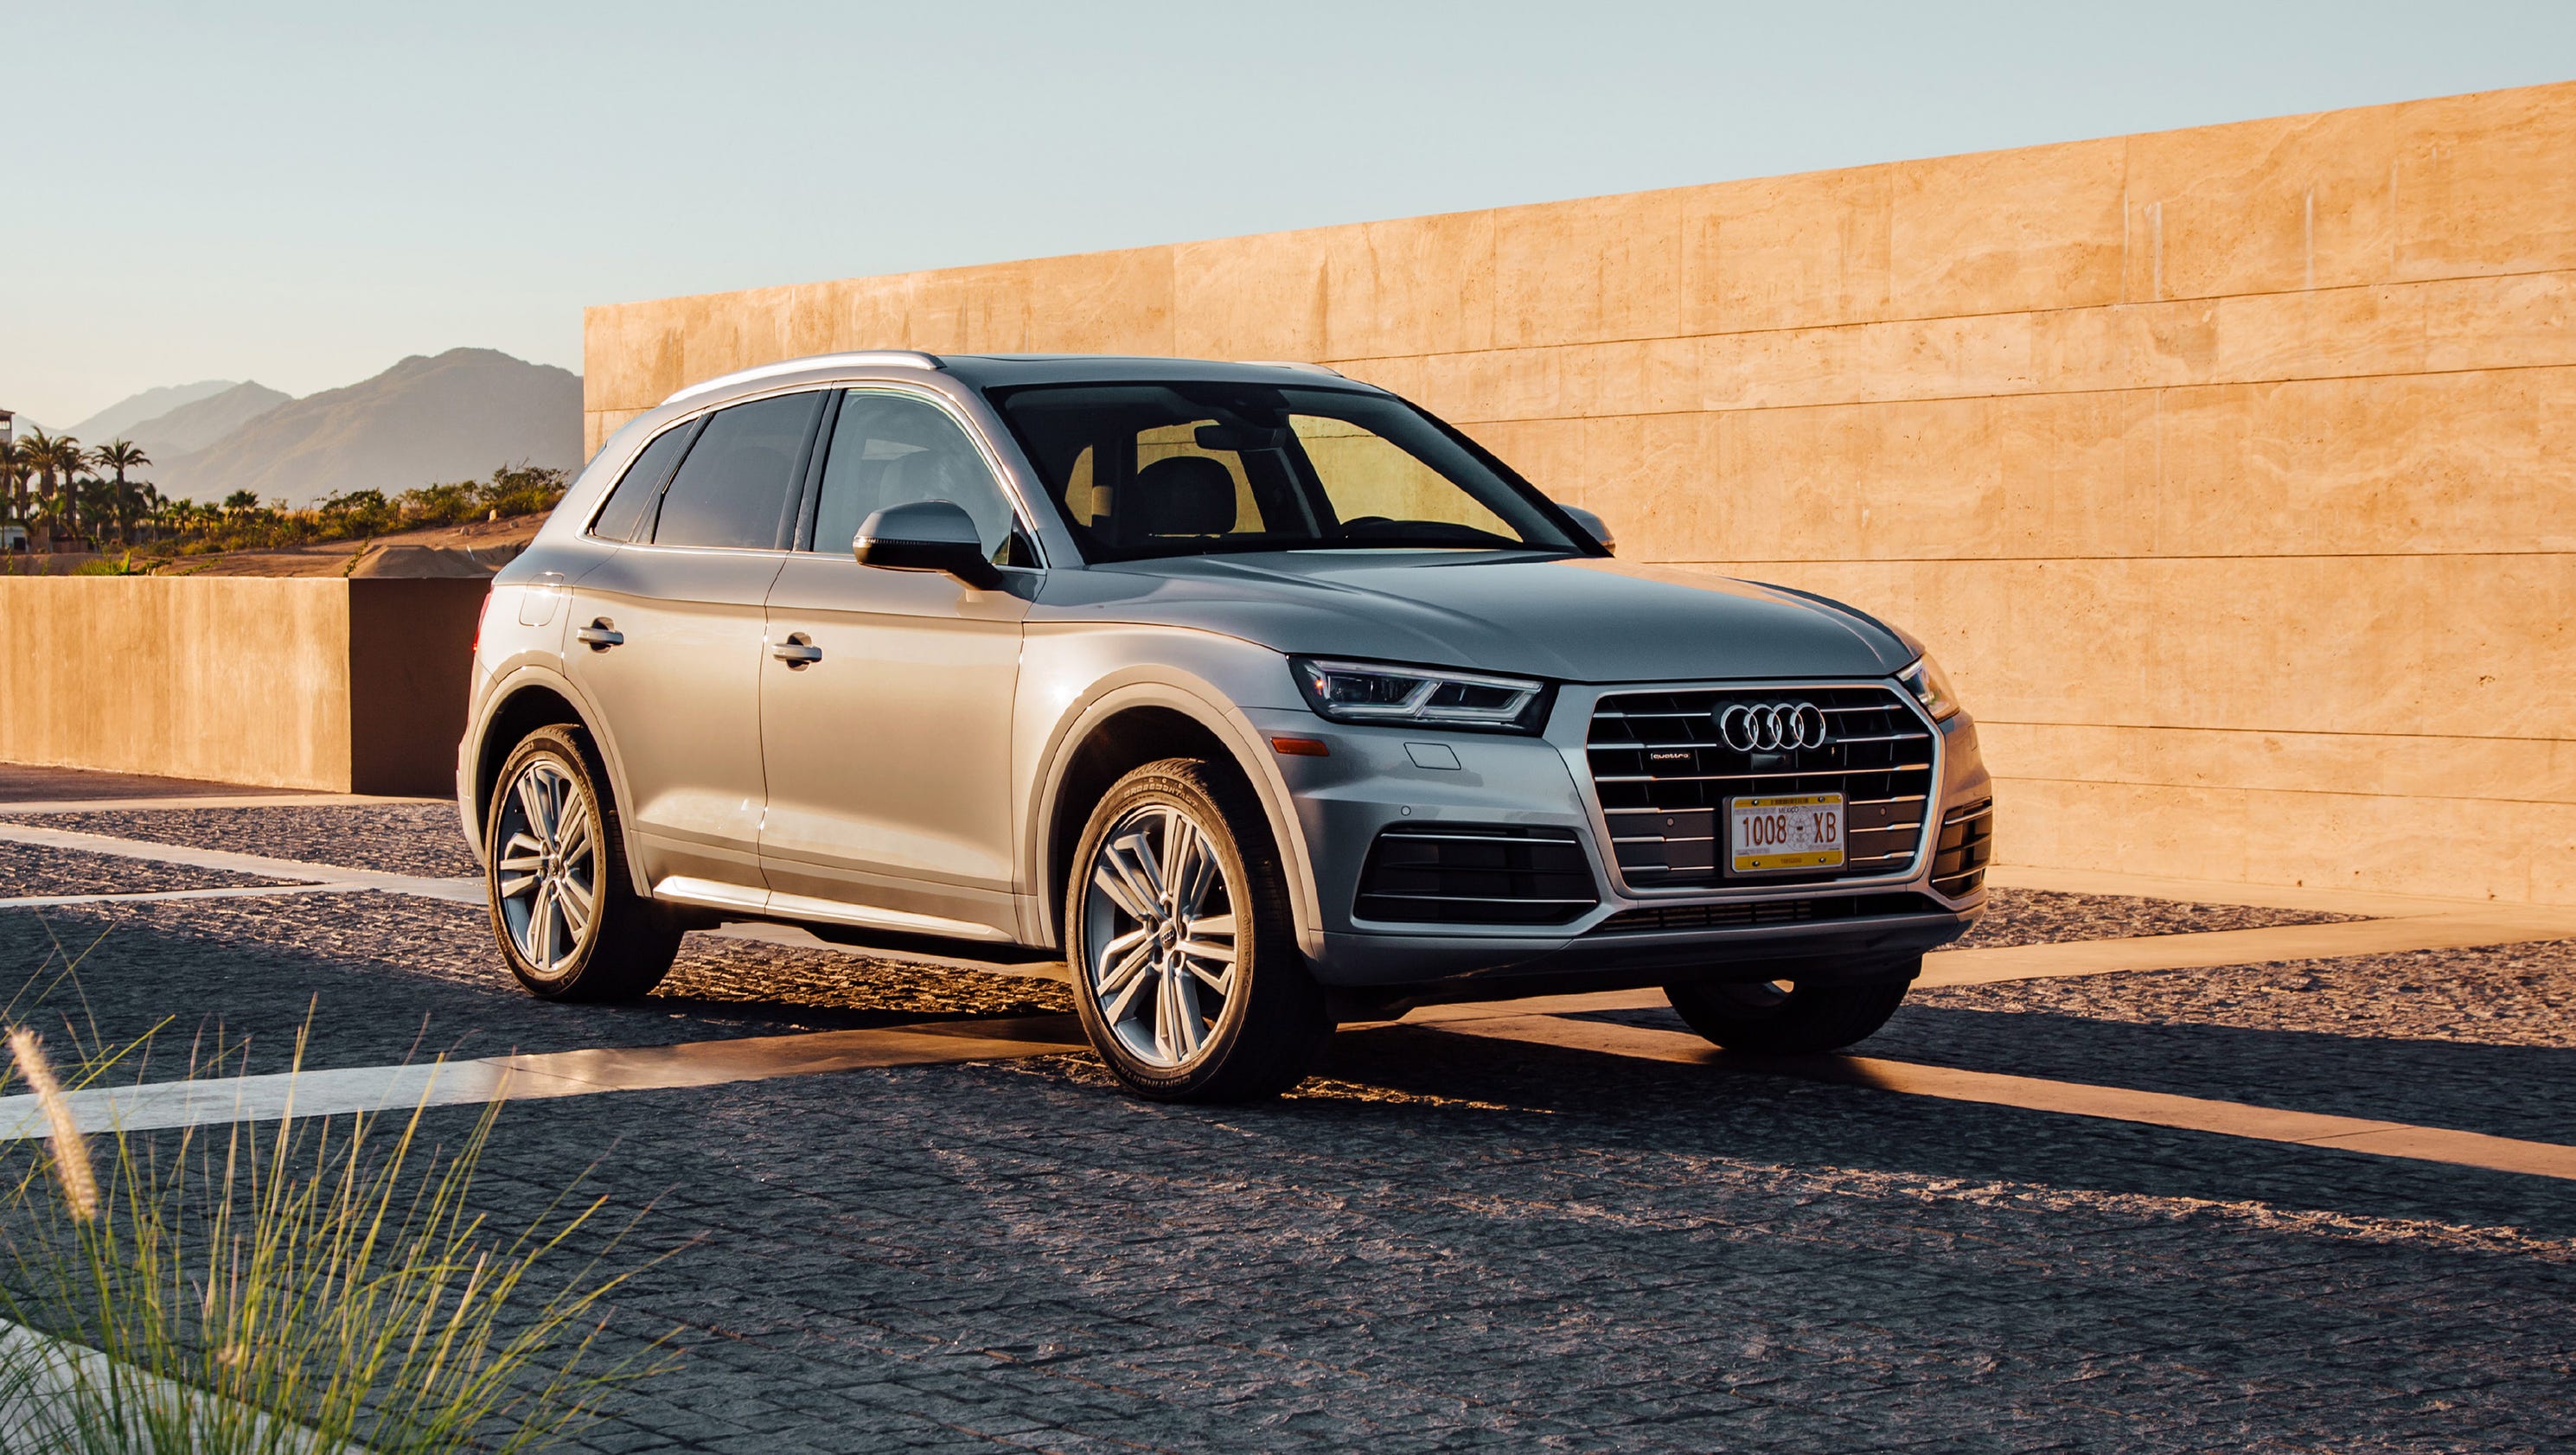 Review: 2018 Audi Q5 SUV fights a battle of inches